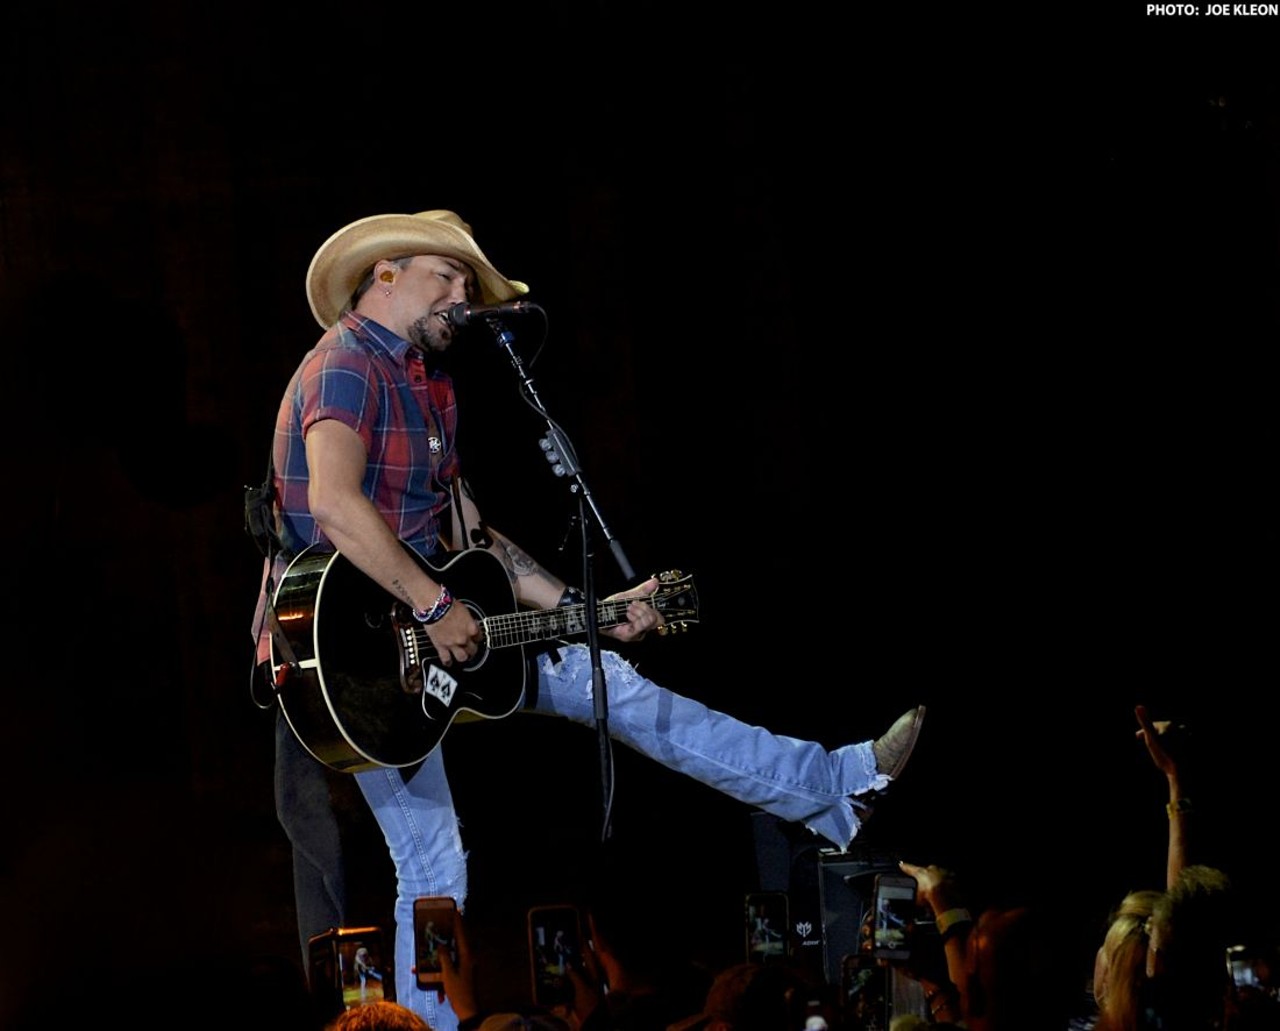 Jason Aldean, Luke Combs and Lauren Alaina Playing at Blossom